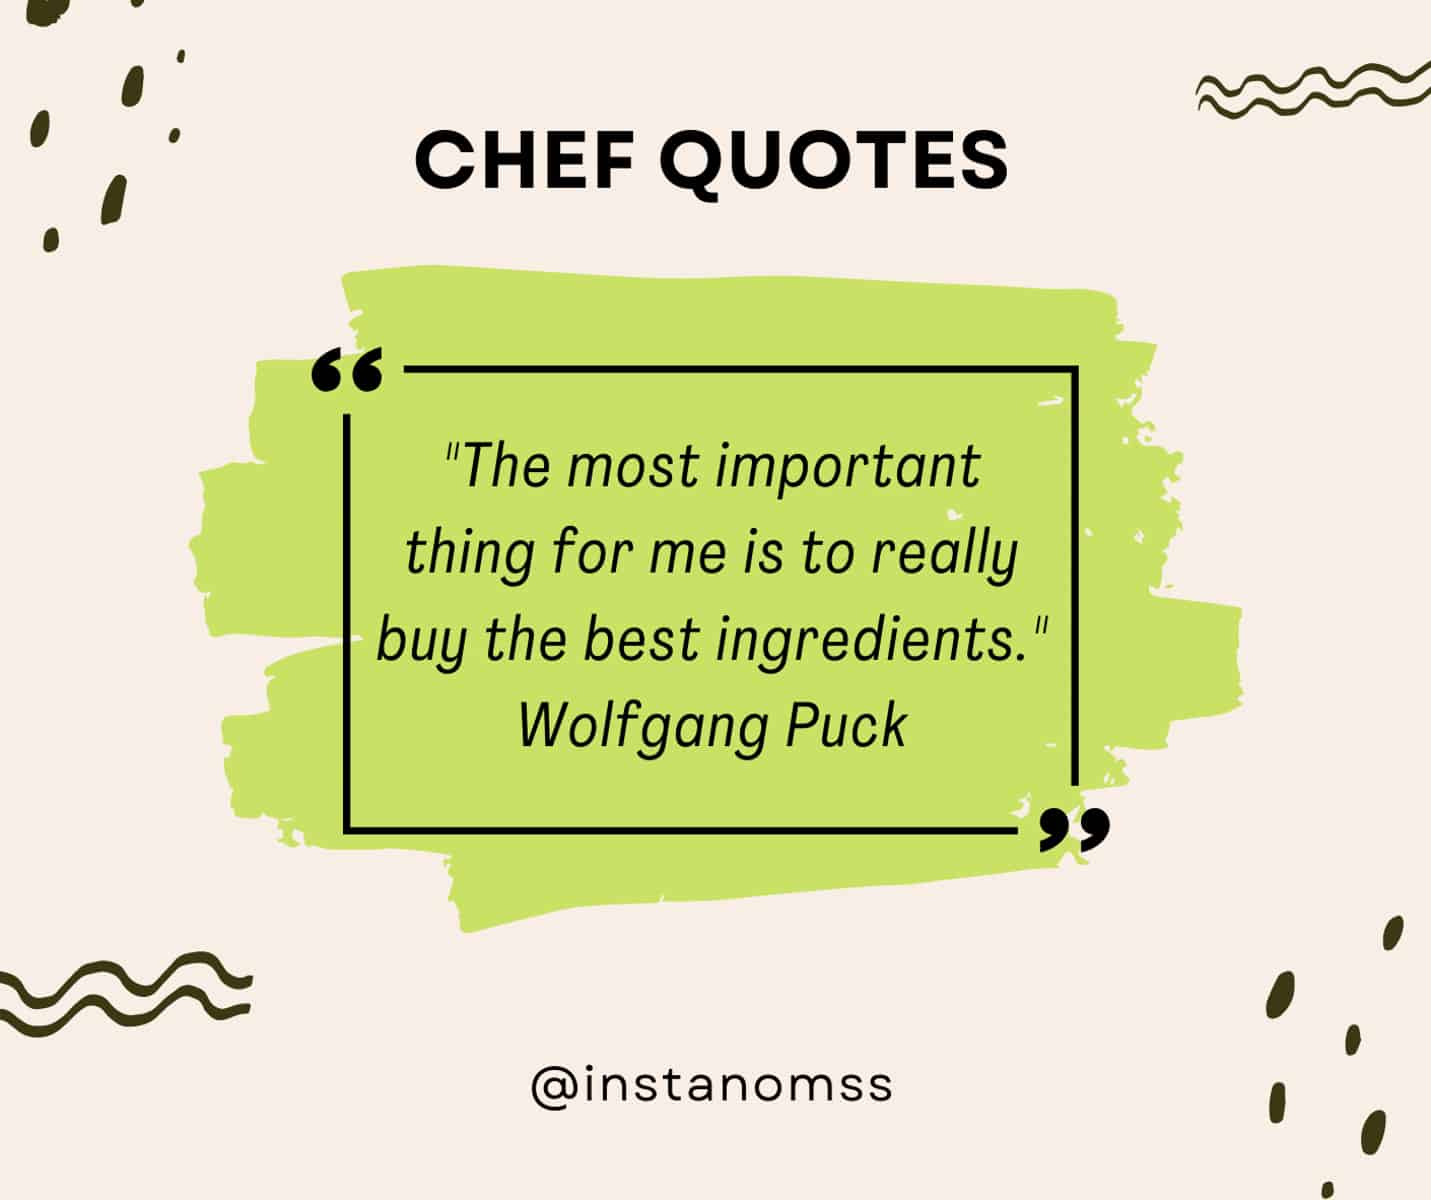 "The most important thing for me is to really buy the best ingredients." Wolfgang Puck